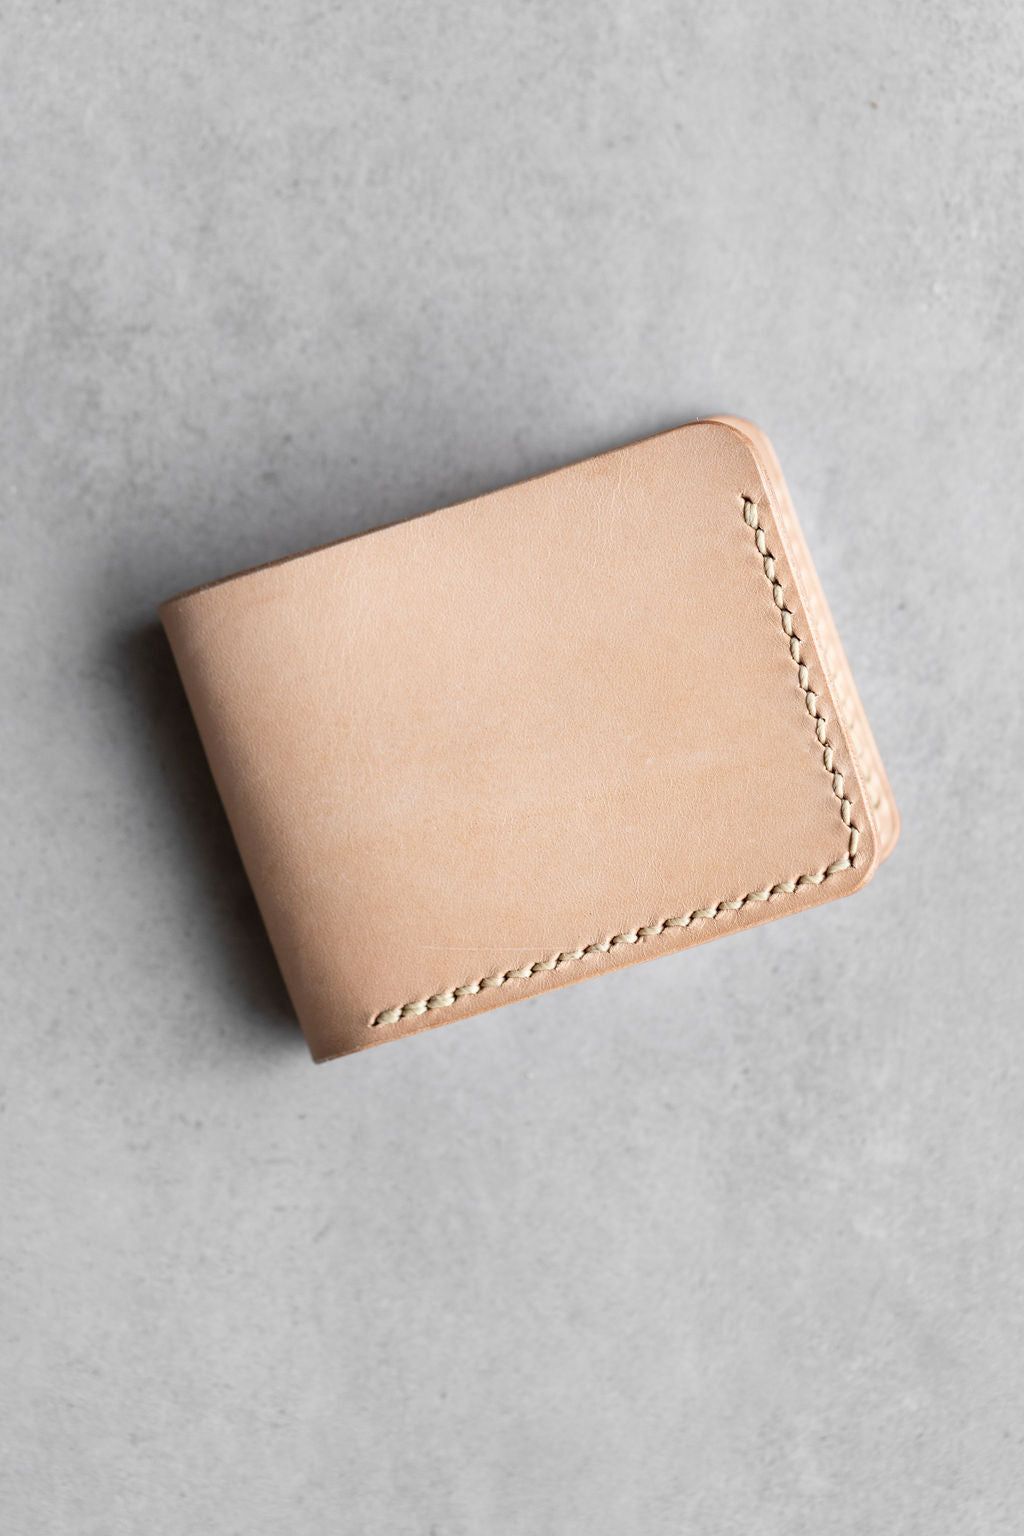 Crafted Wallets: Artisanal Excellence for Your Everyday Essentials